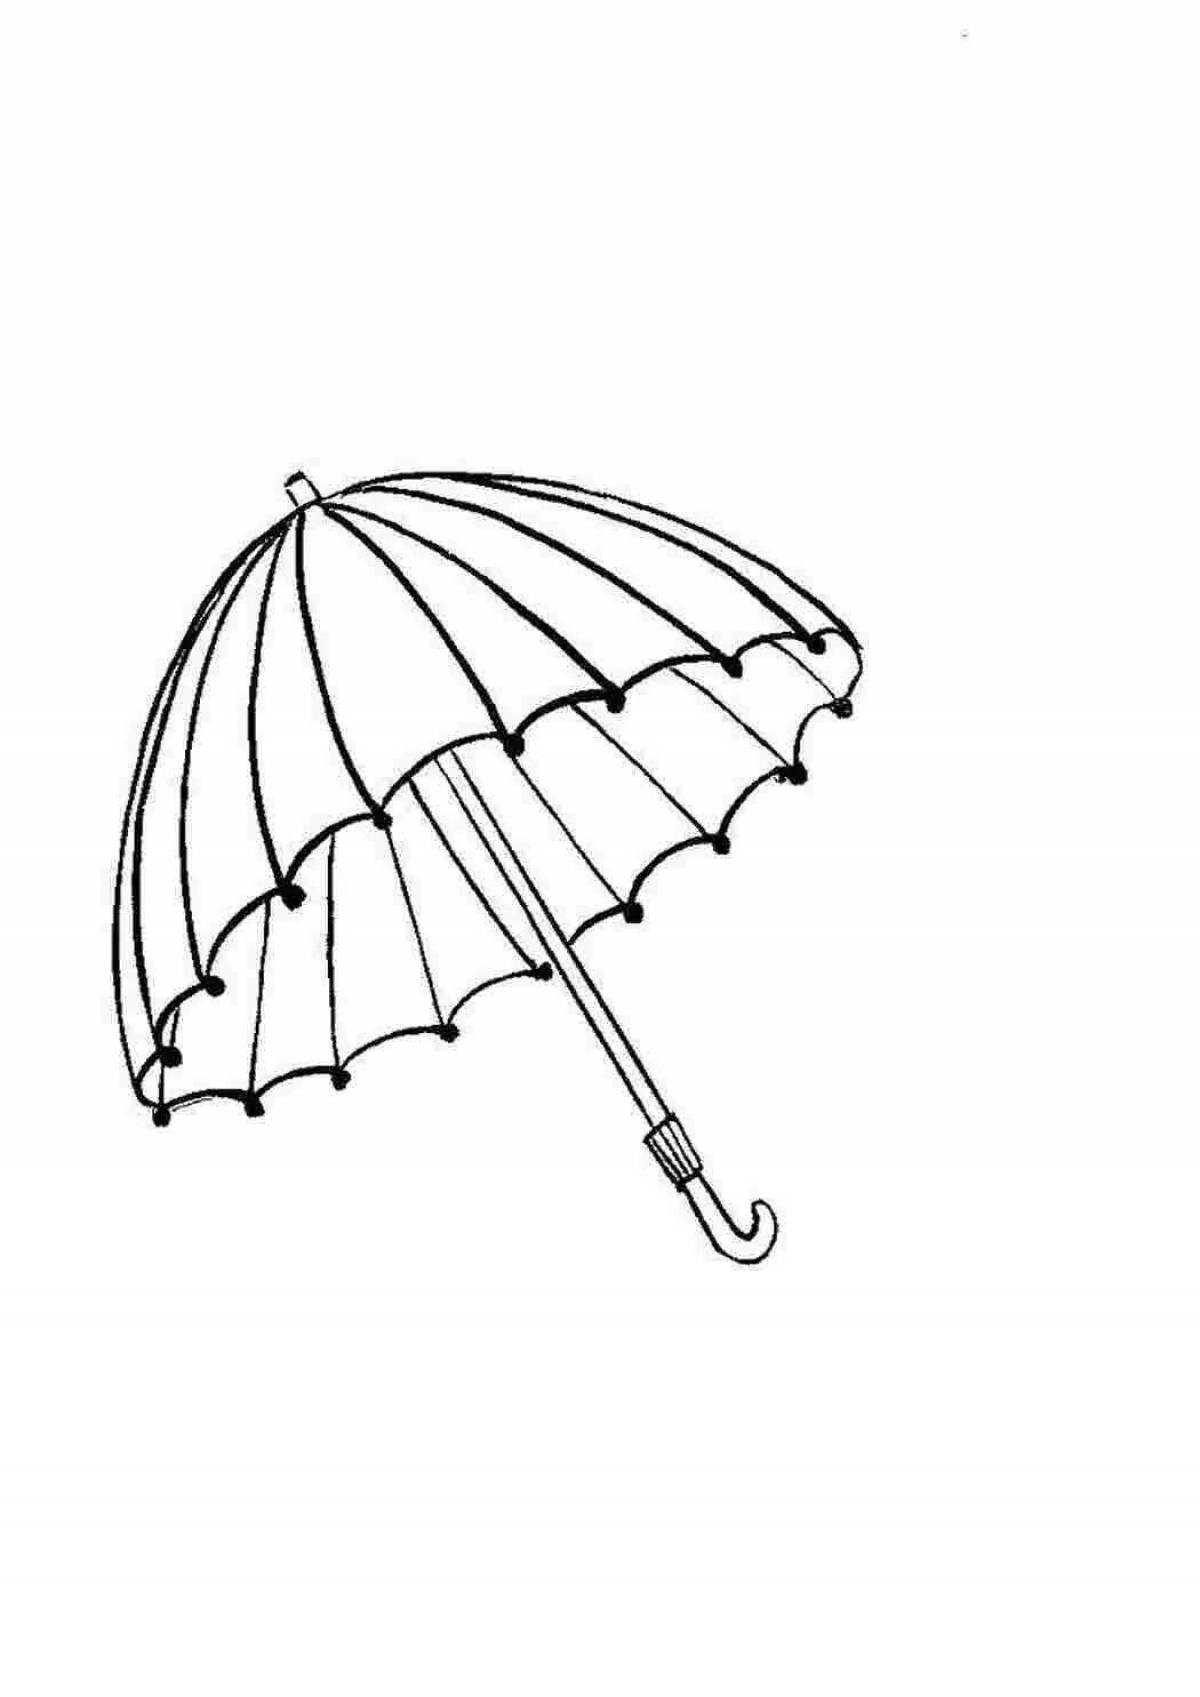 Coloring book umbrella with colorful clouds for children 3-4 years old